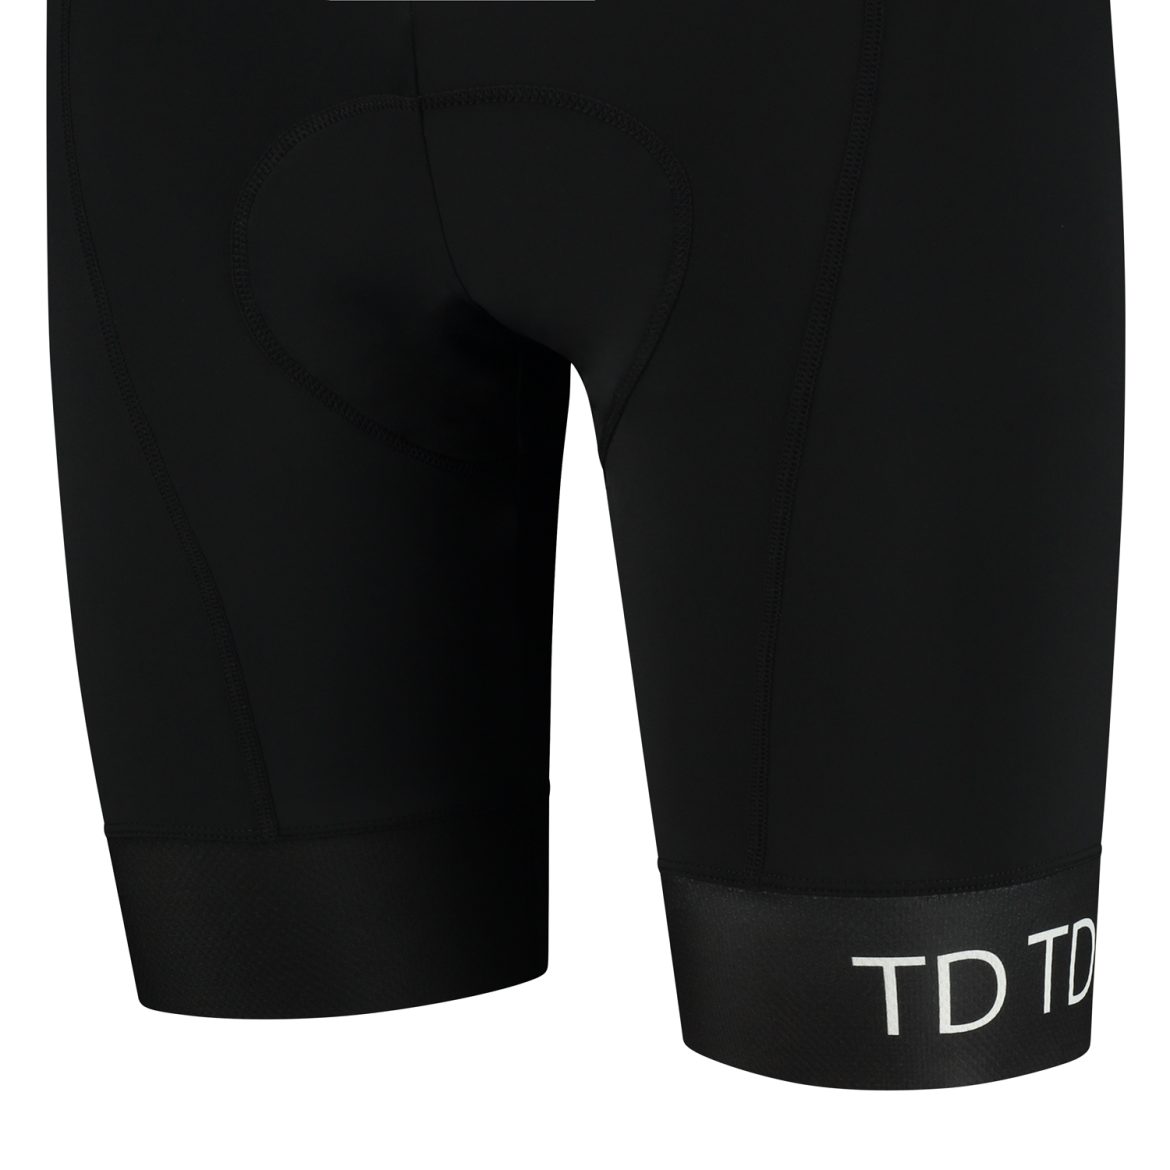 Black cycling shorts with suspenders for women in black with TD grippers